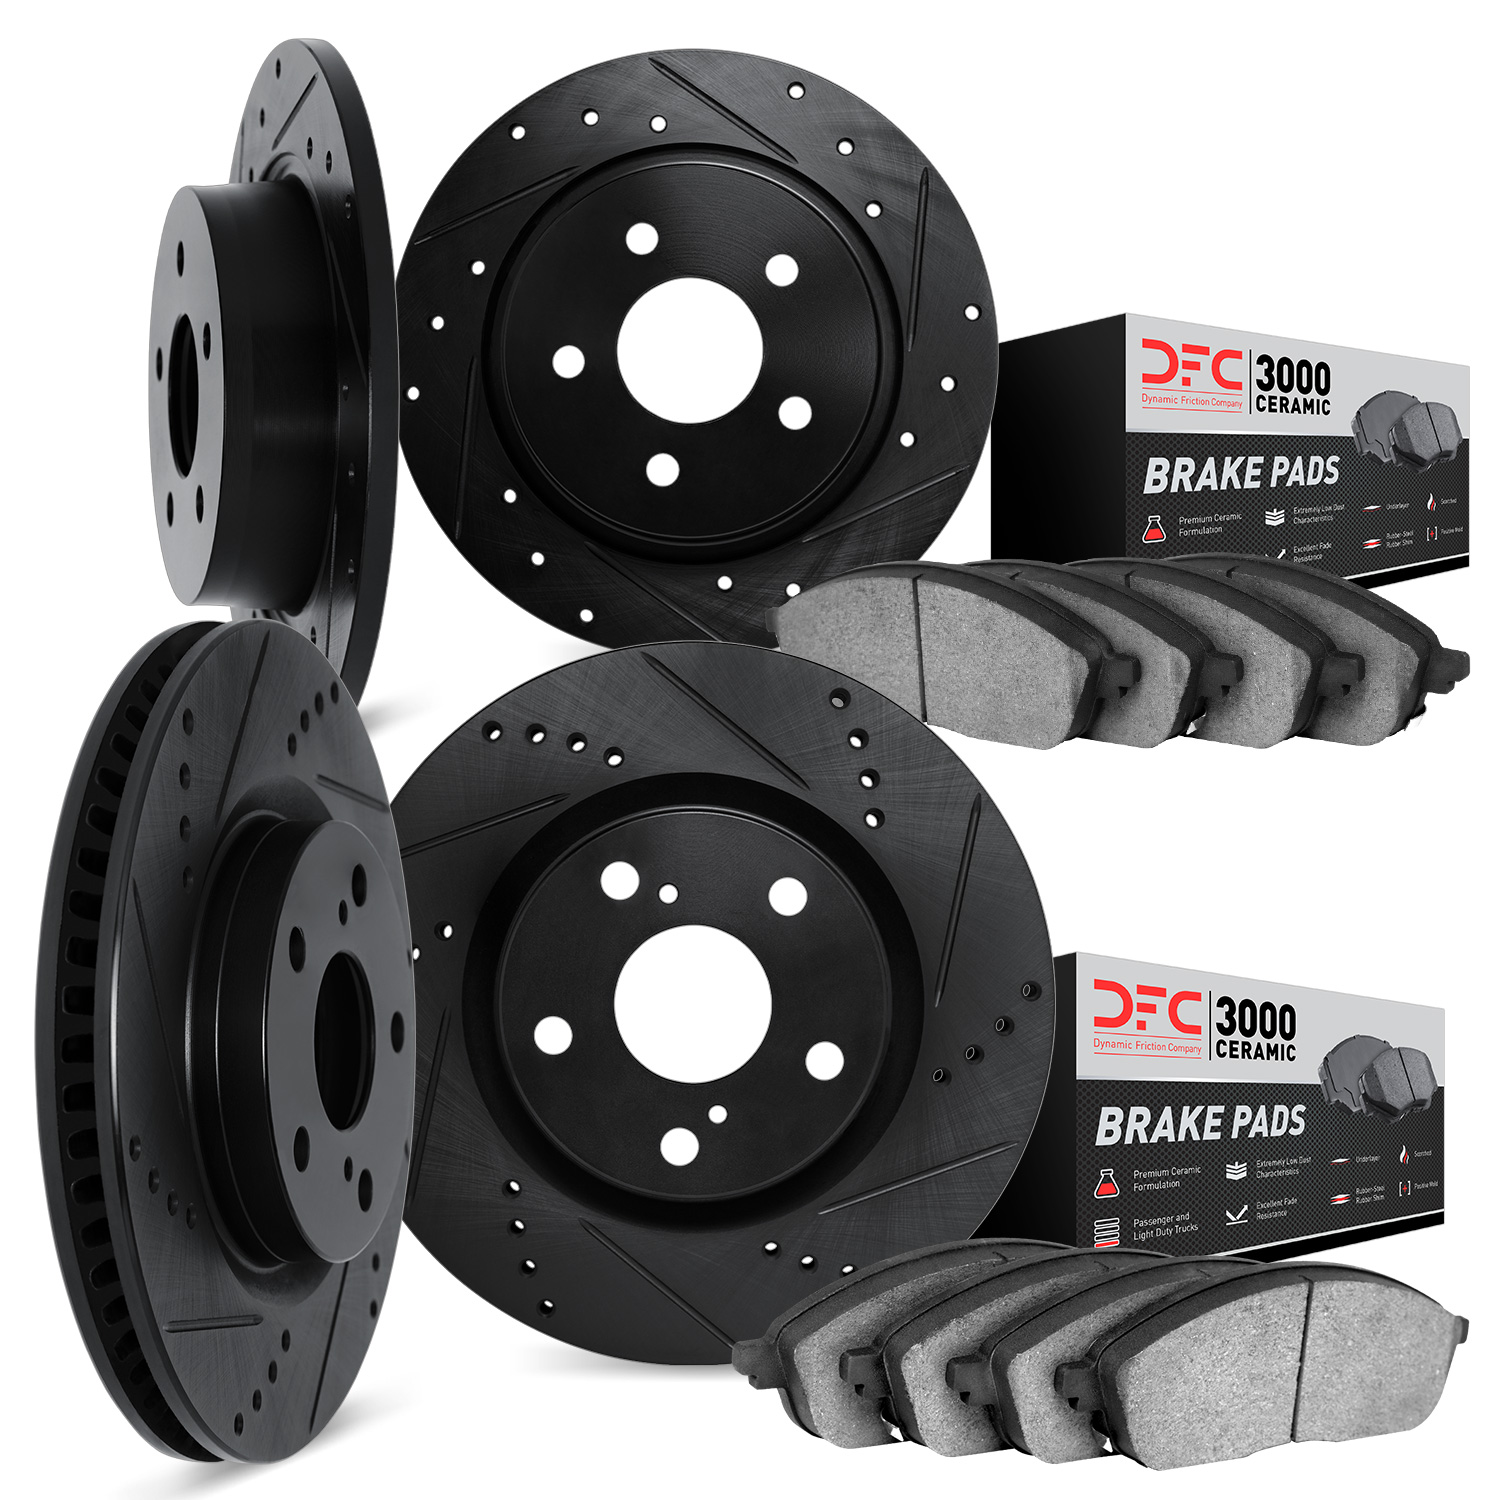 8304-59033 Drilled/Slotted Brake Rotors with 3000-Series Ceramic Brake Pads Kit [Black], 2003-2007 Acura/Honda, Position: Front